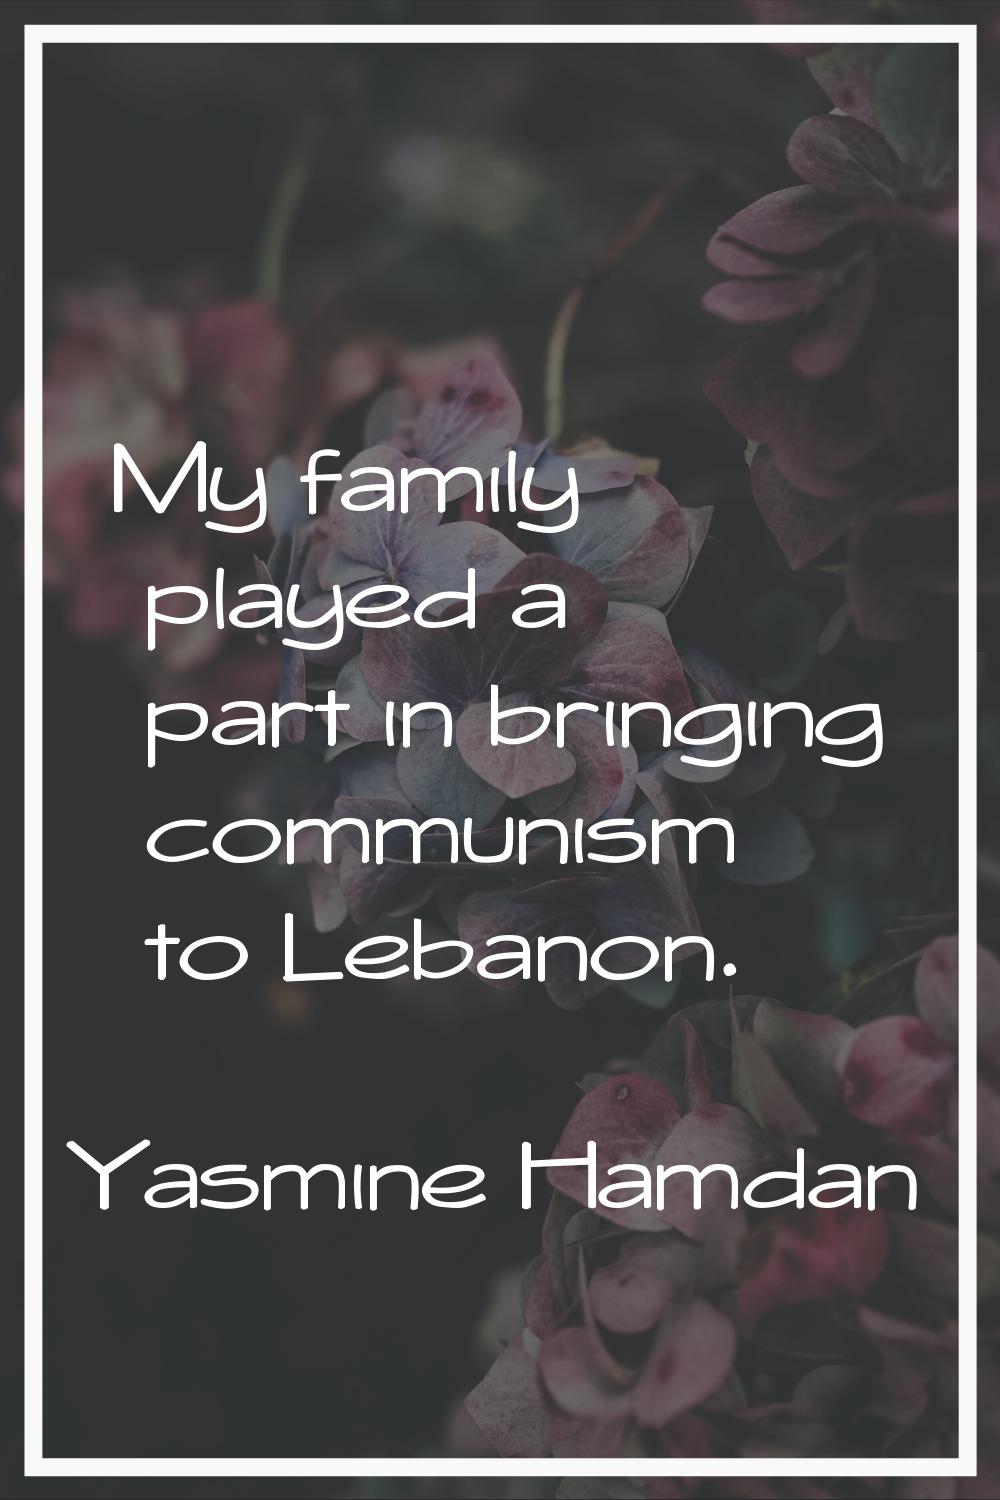 My family played a part in bringing communism to Lebanon.